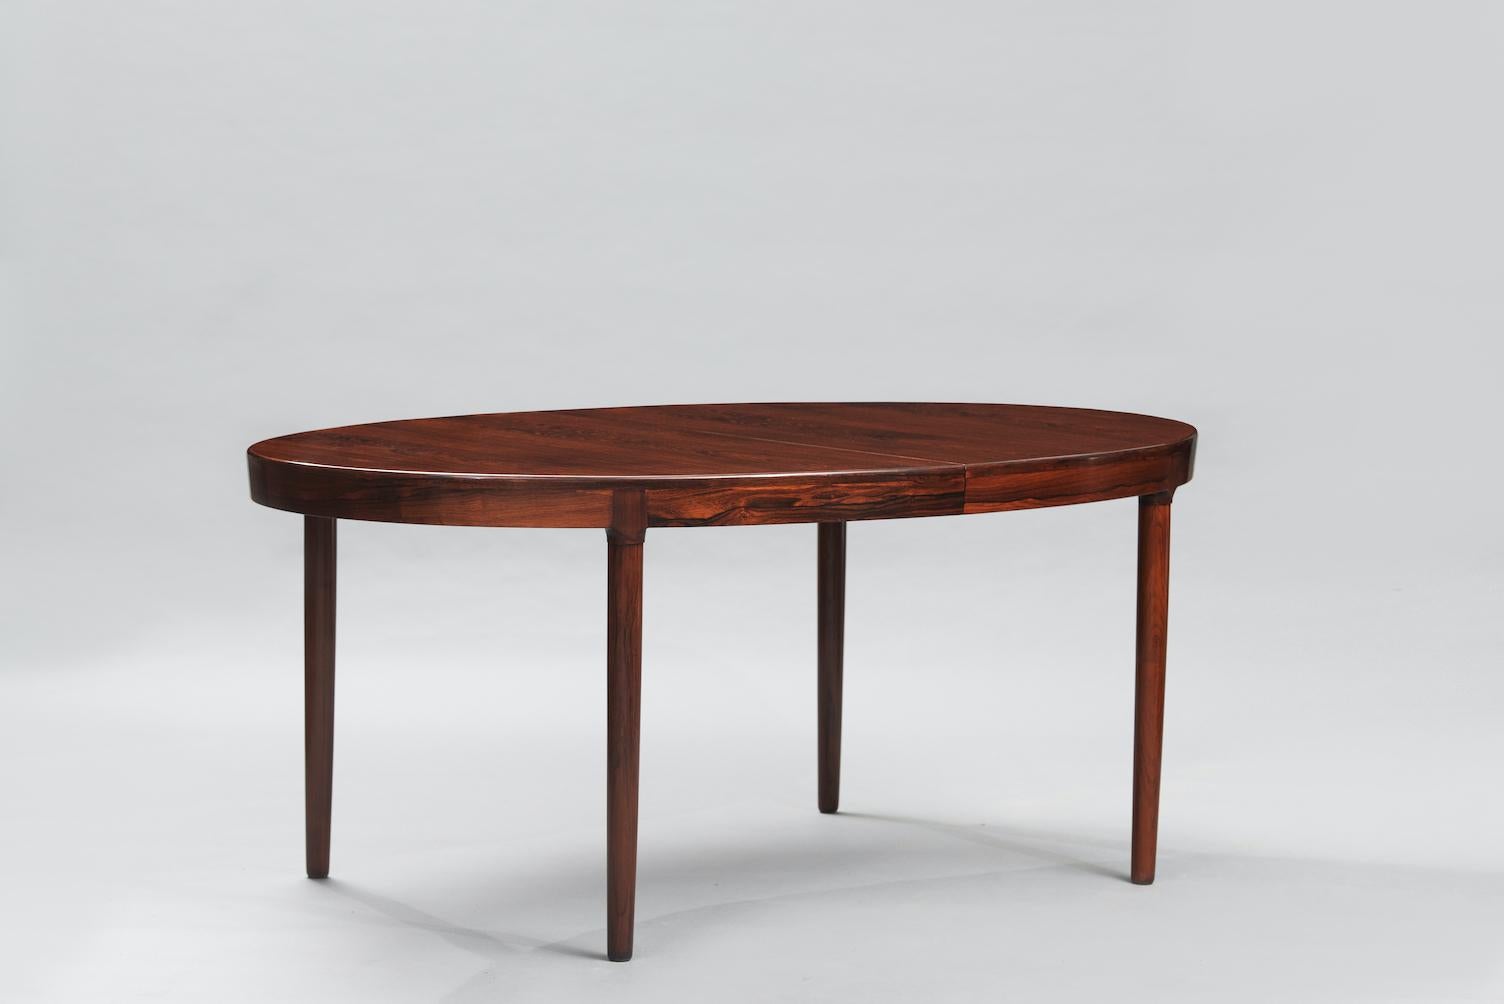 Harry Ostergaard extendable rosewood oval dining table produced by Randers Mobelfabrik.
Measures: Width: 270cm (open), 170cm (closed).